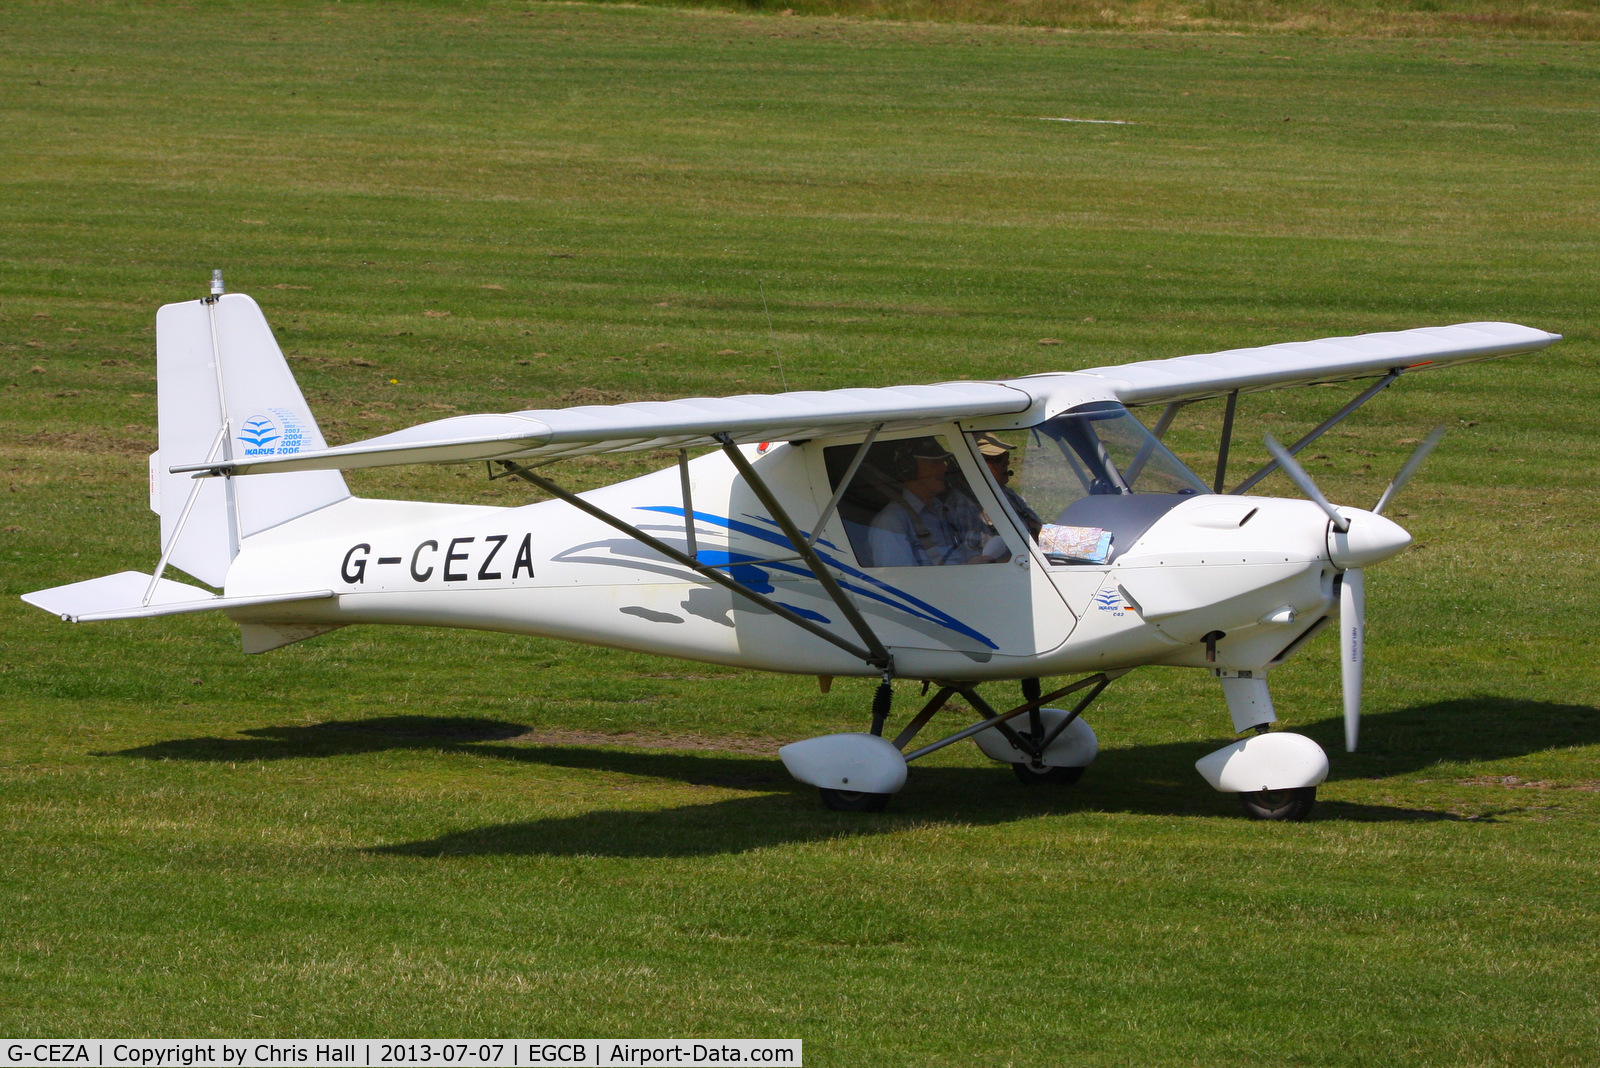 G-CEZA, 2007 Comco Ikarus C42 FB80 C/N 0711-6923, at the Barton open day and fly in